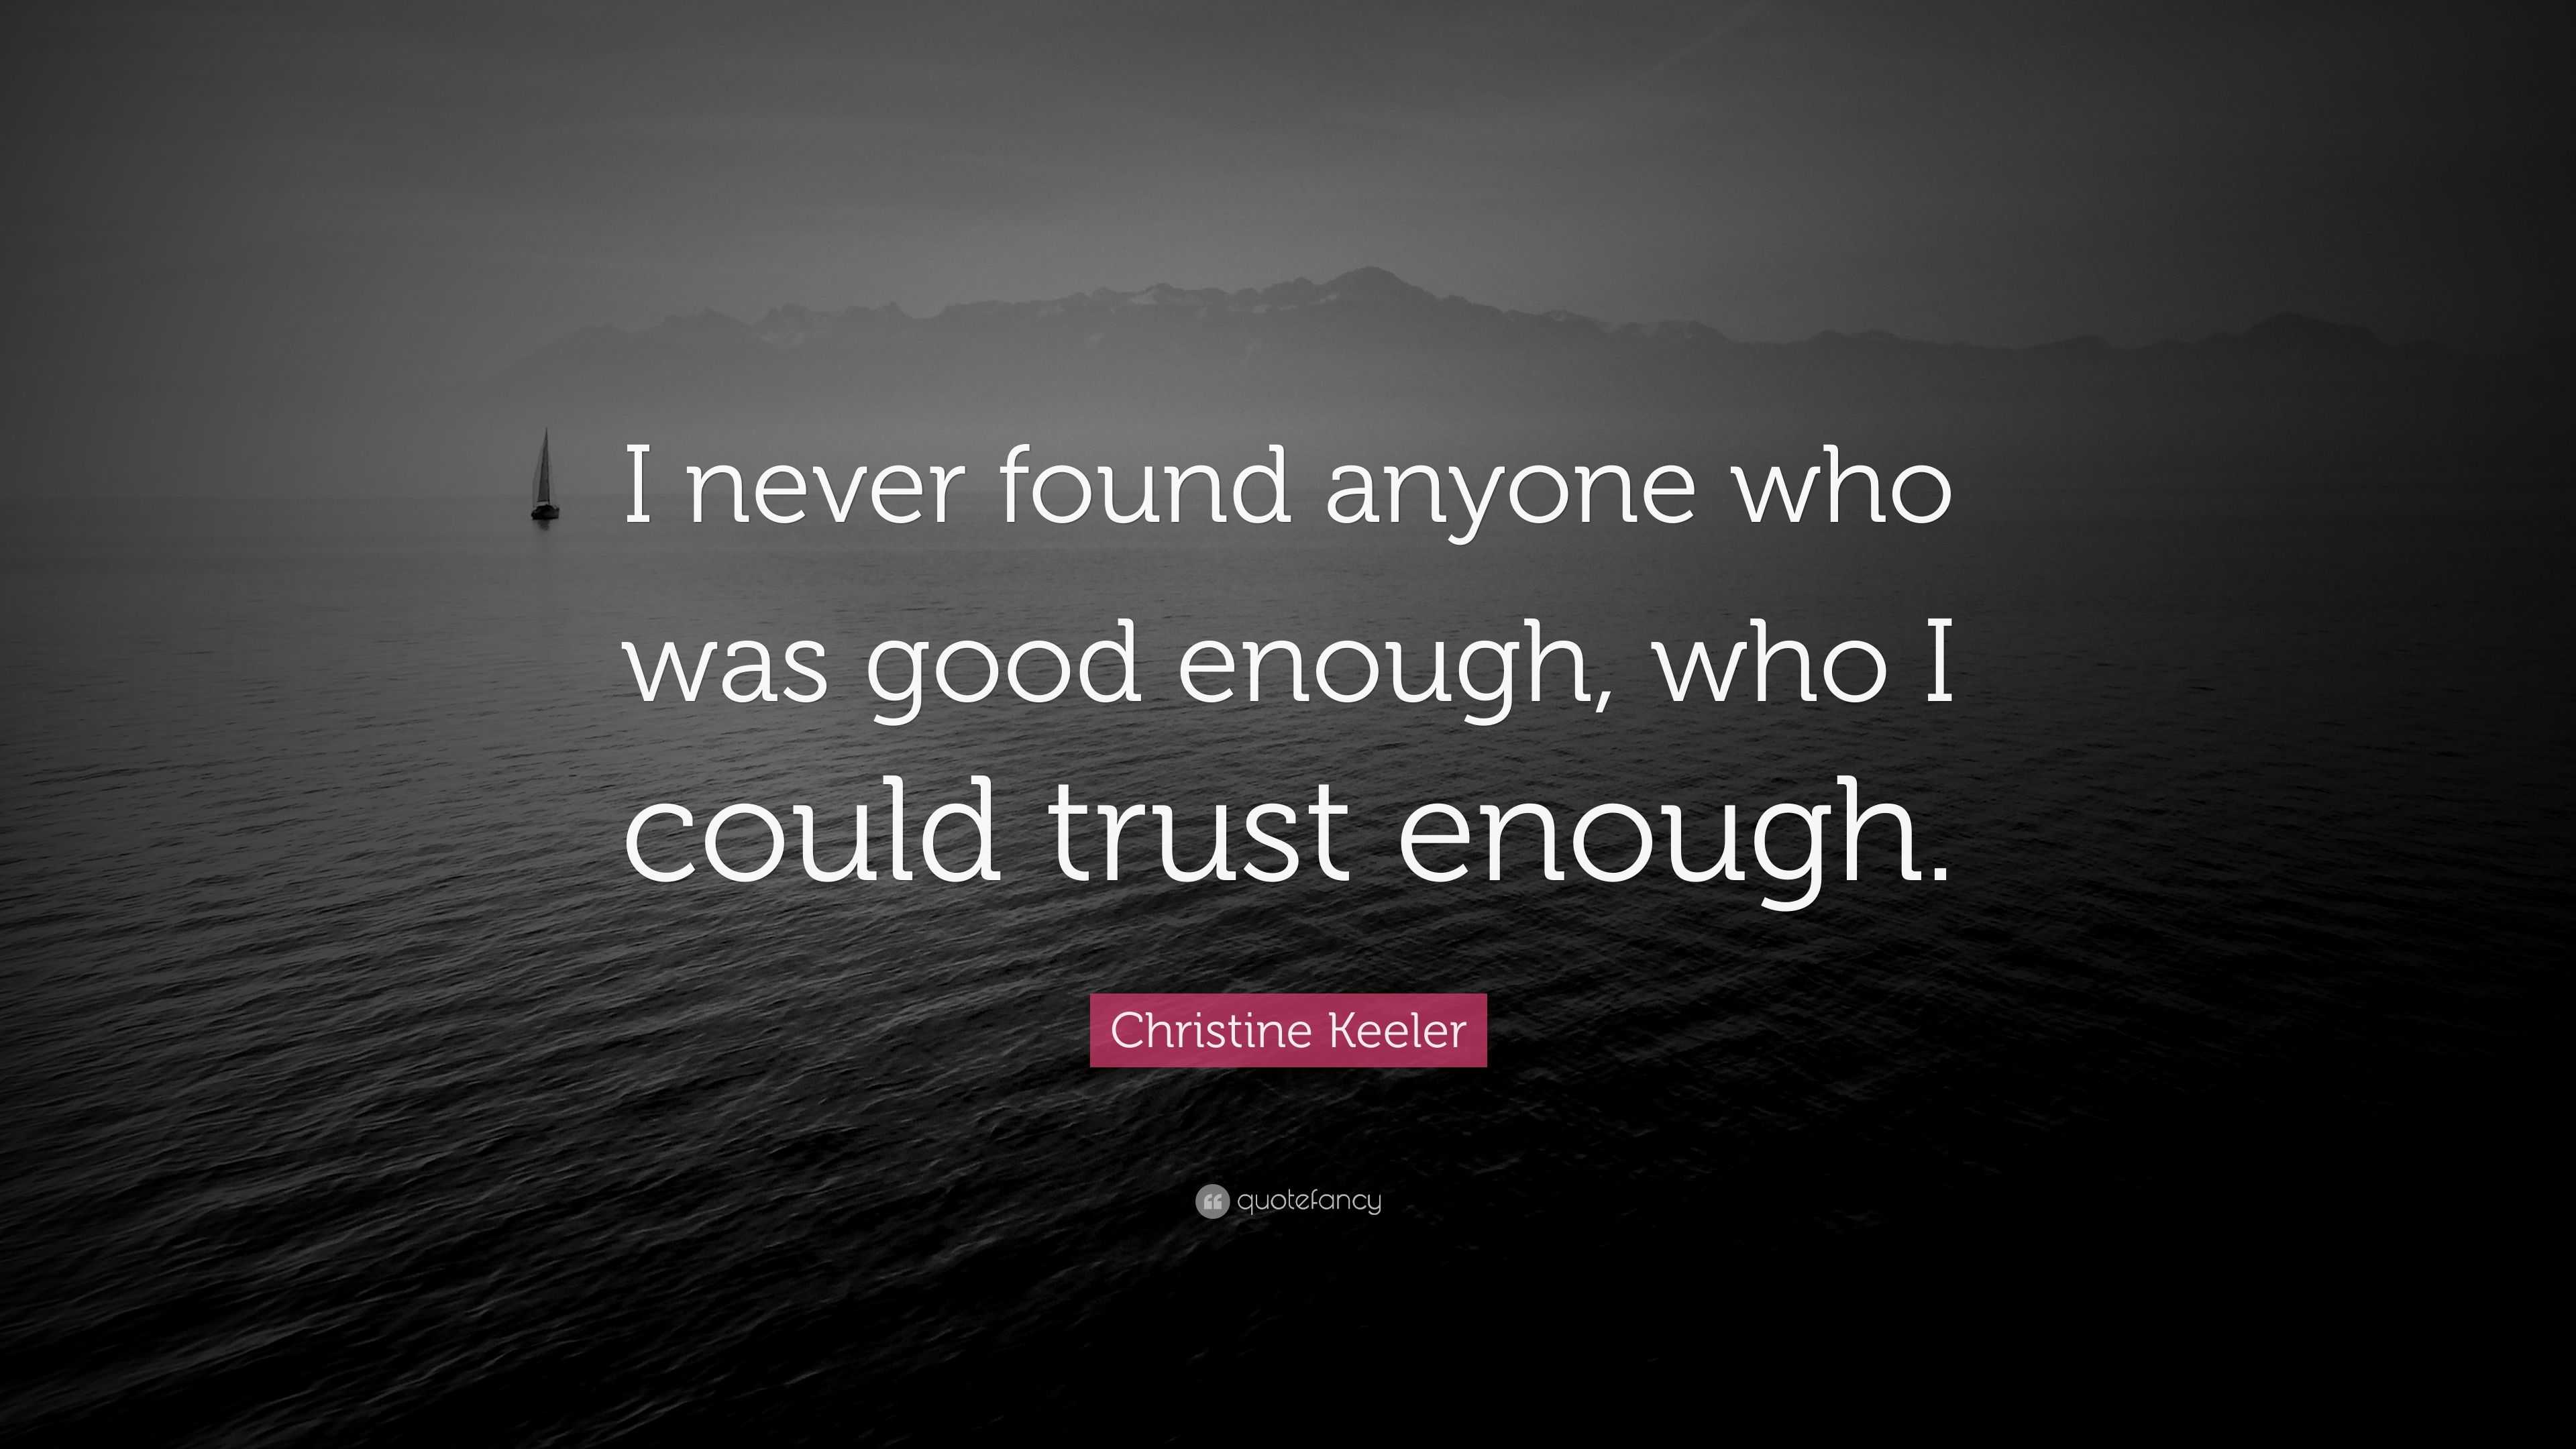 Christine Keeler Quote: “I never found anyone who was good enough, who ...